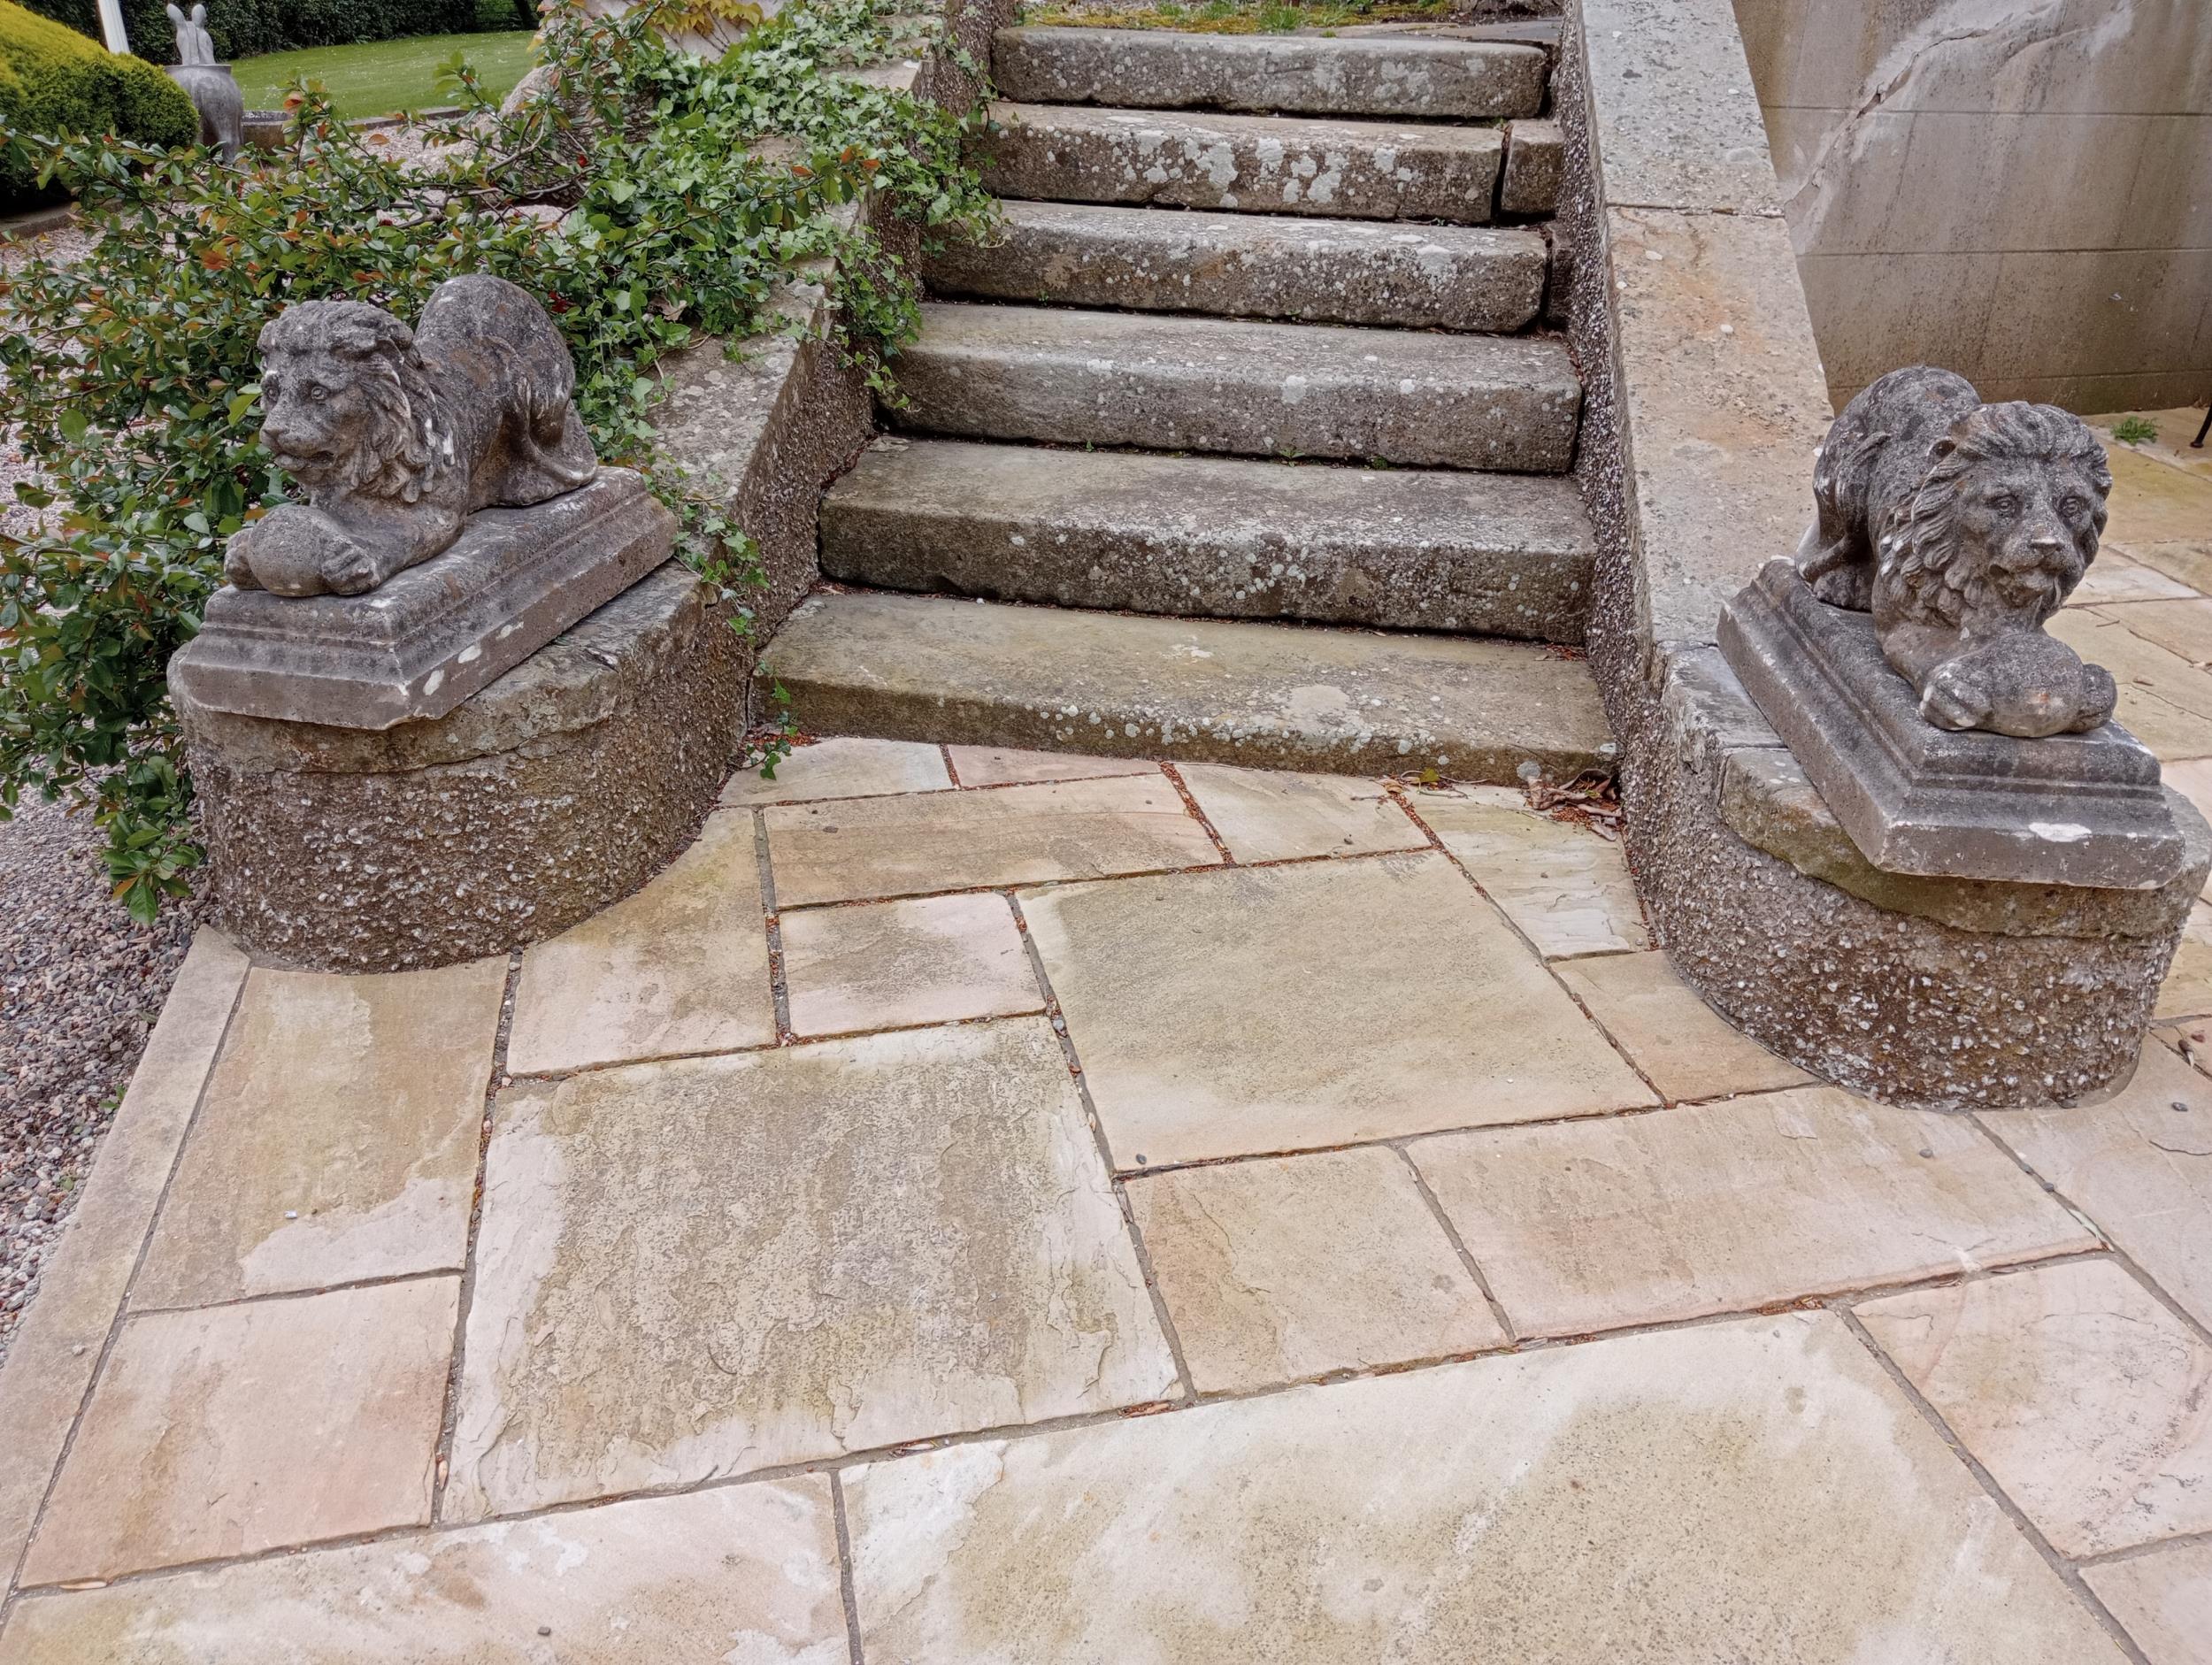 Pair of stone lions with balls at feet {H 45cm x W 28cm x D 66cm}. (NOT AVAILABLE TO VIEW IN